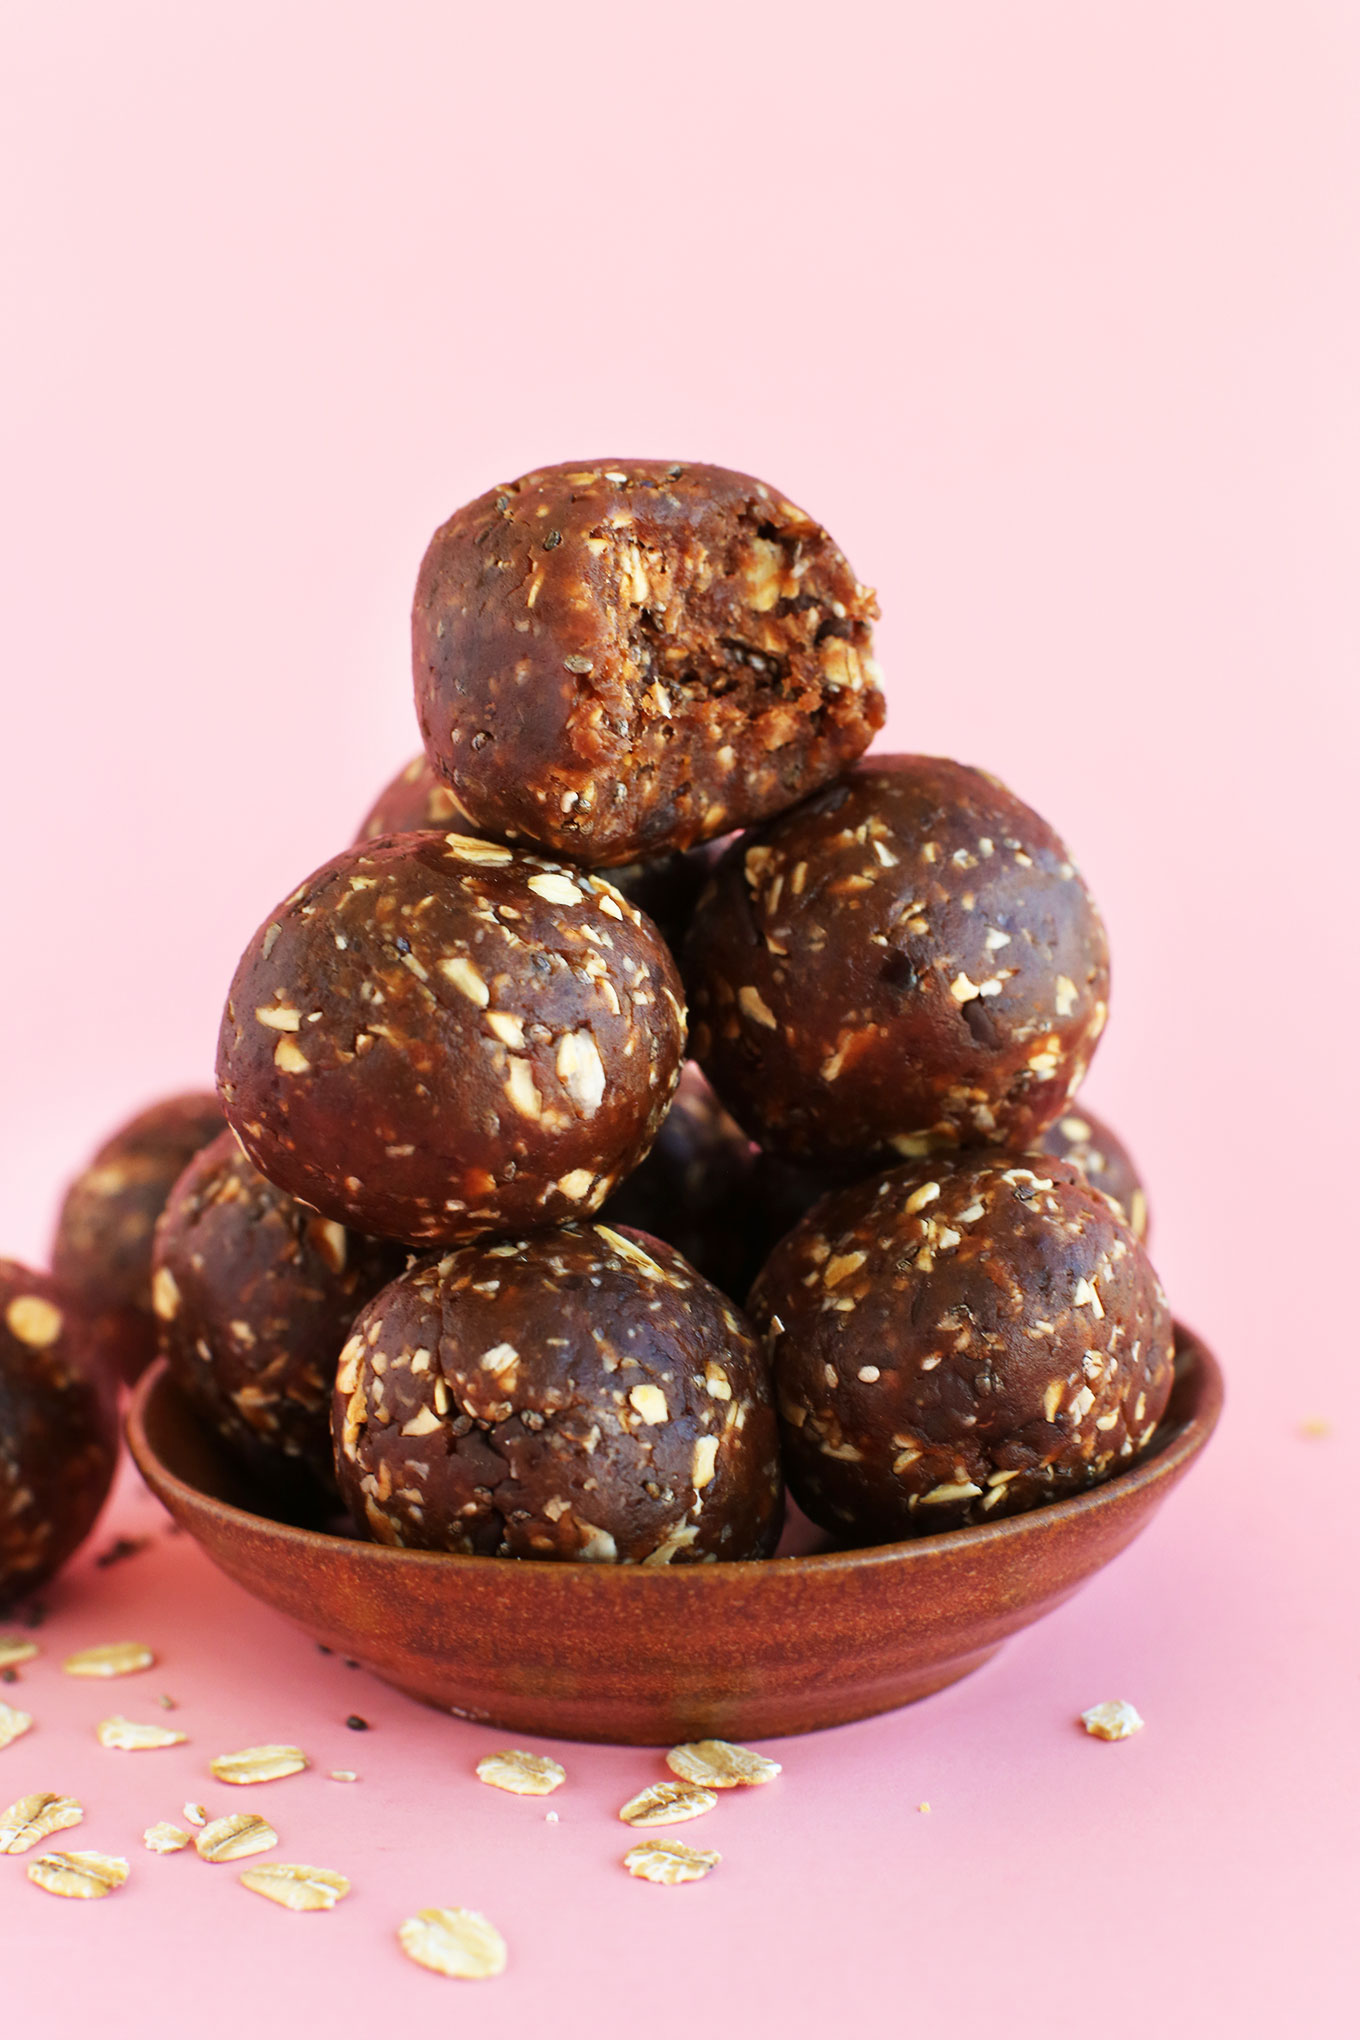 Stack of our healthy Peanut Butter Cup Energy Bites for a vegan gluten-free snack